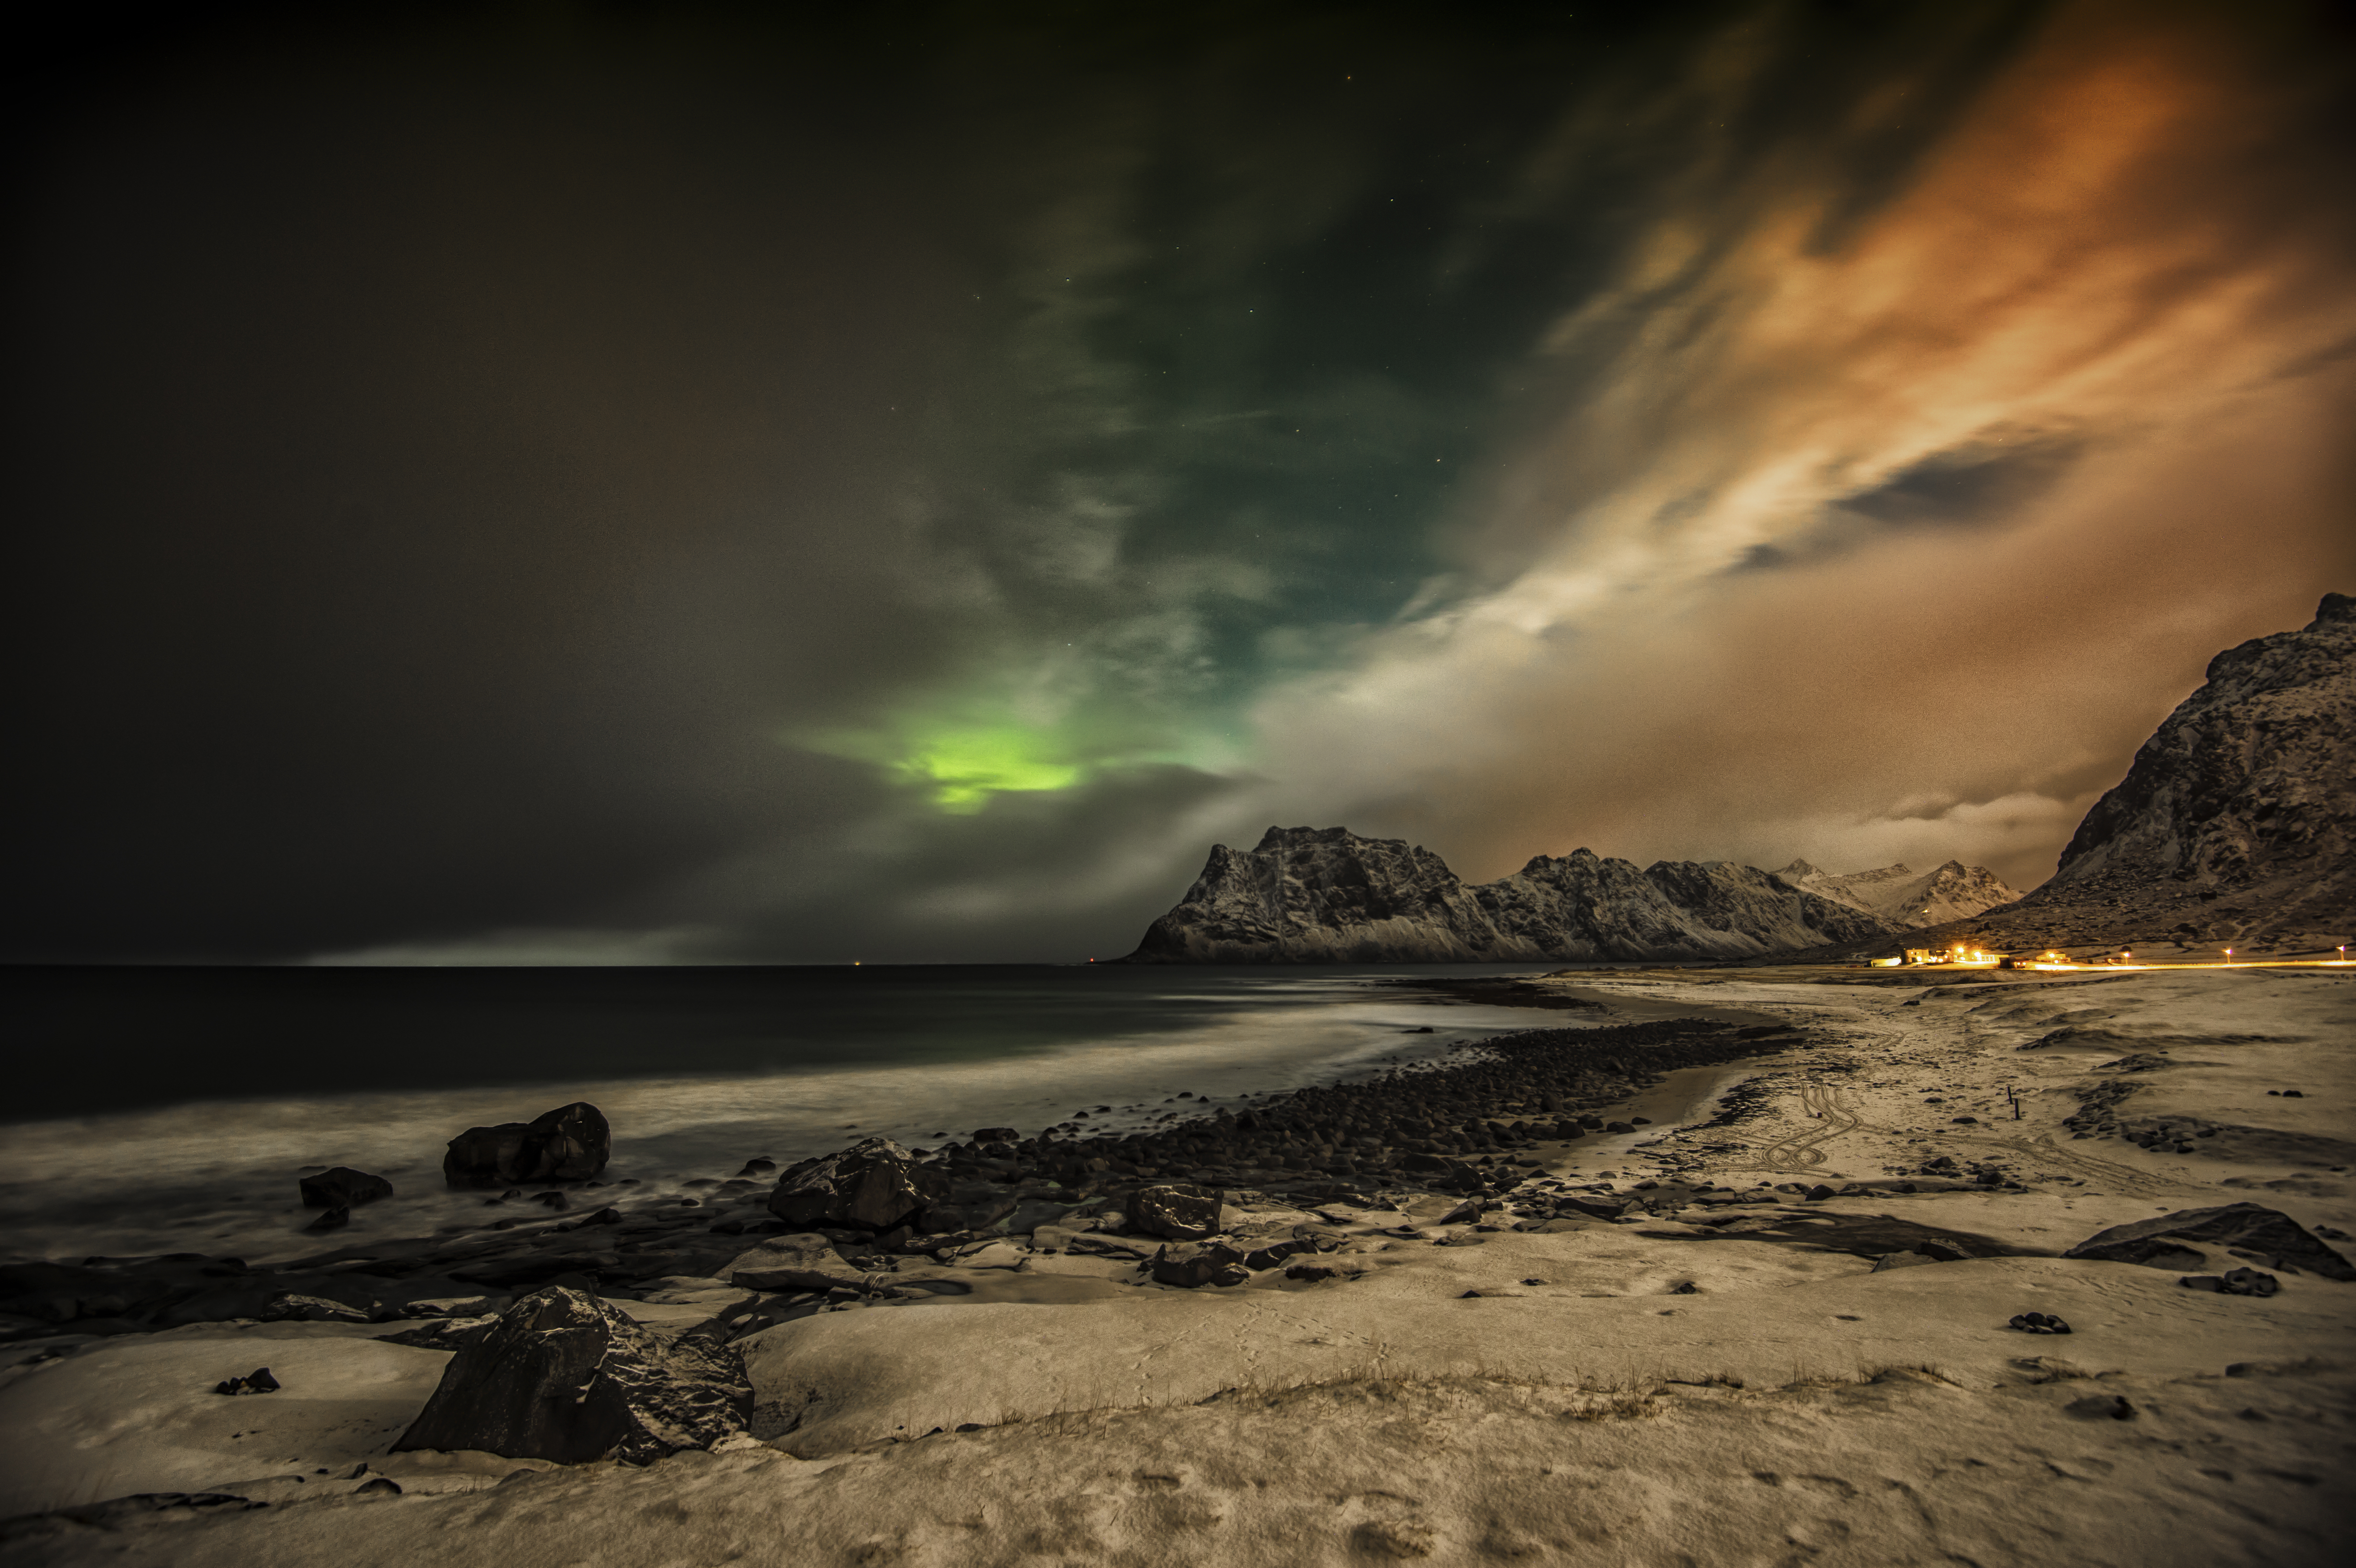 Moonlight Beach ( Arctic Landscape ) by Stein Liland